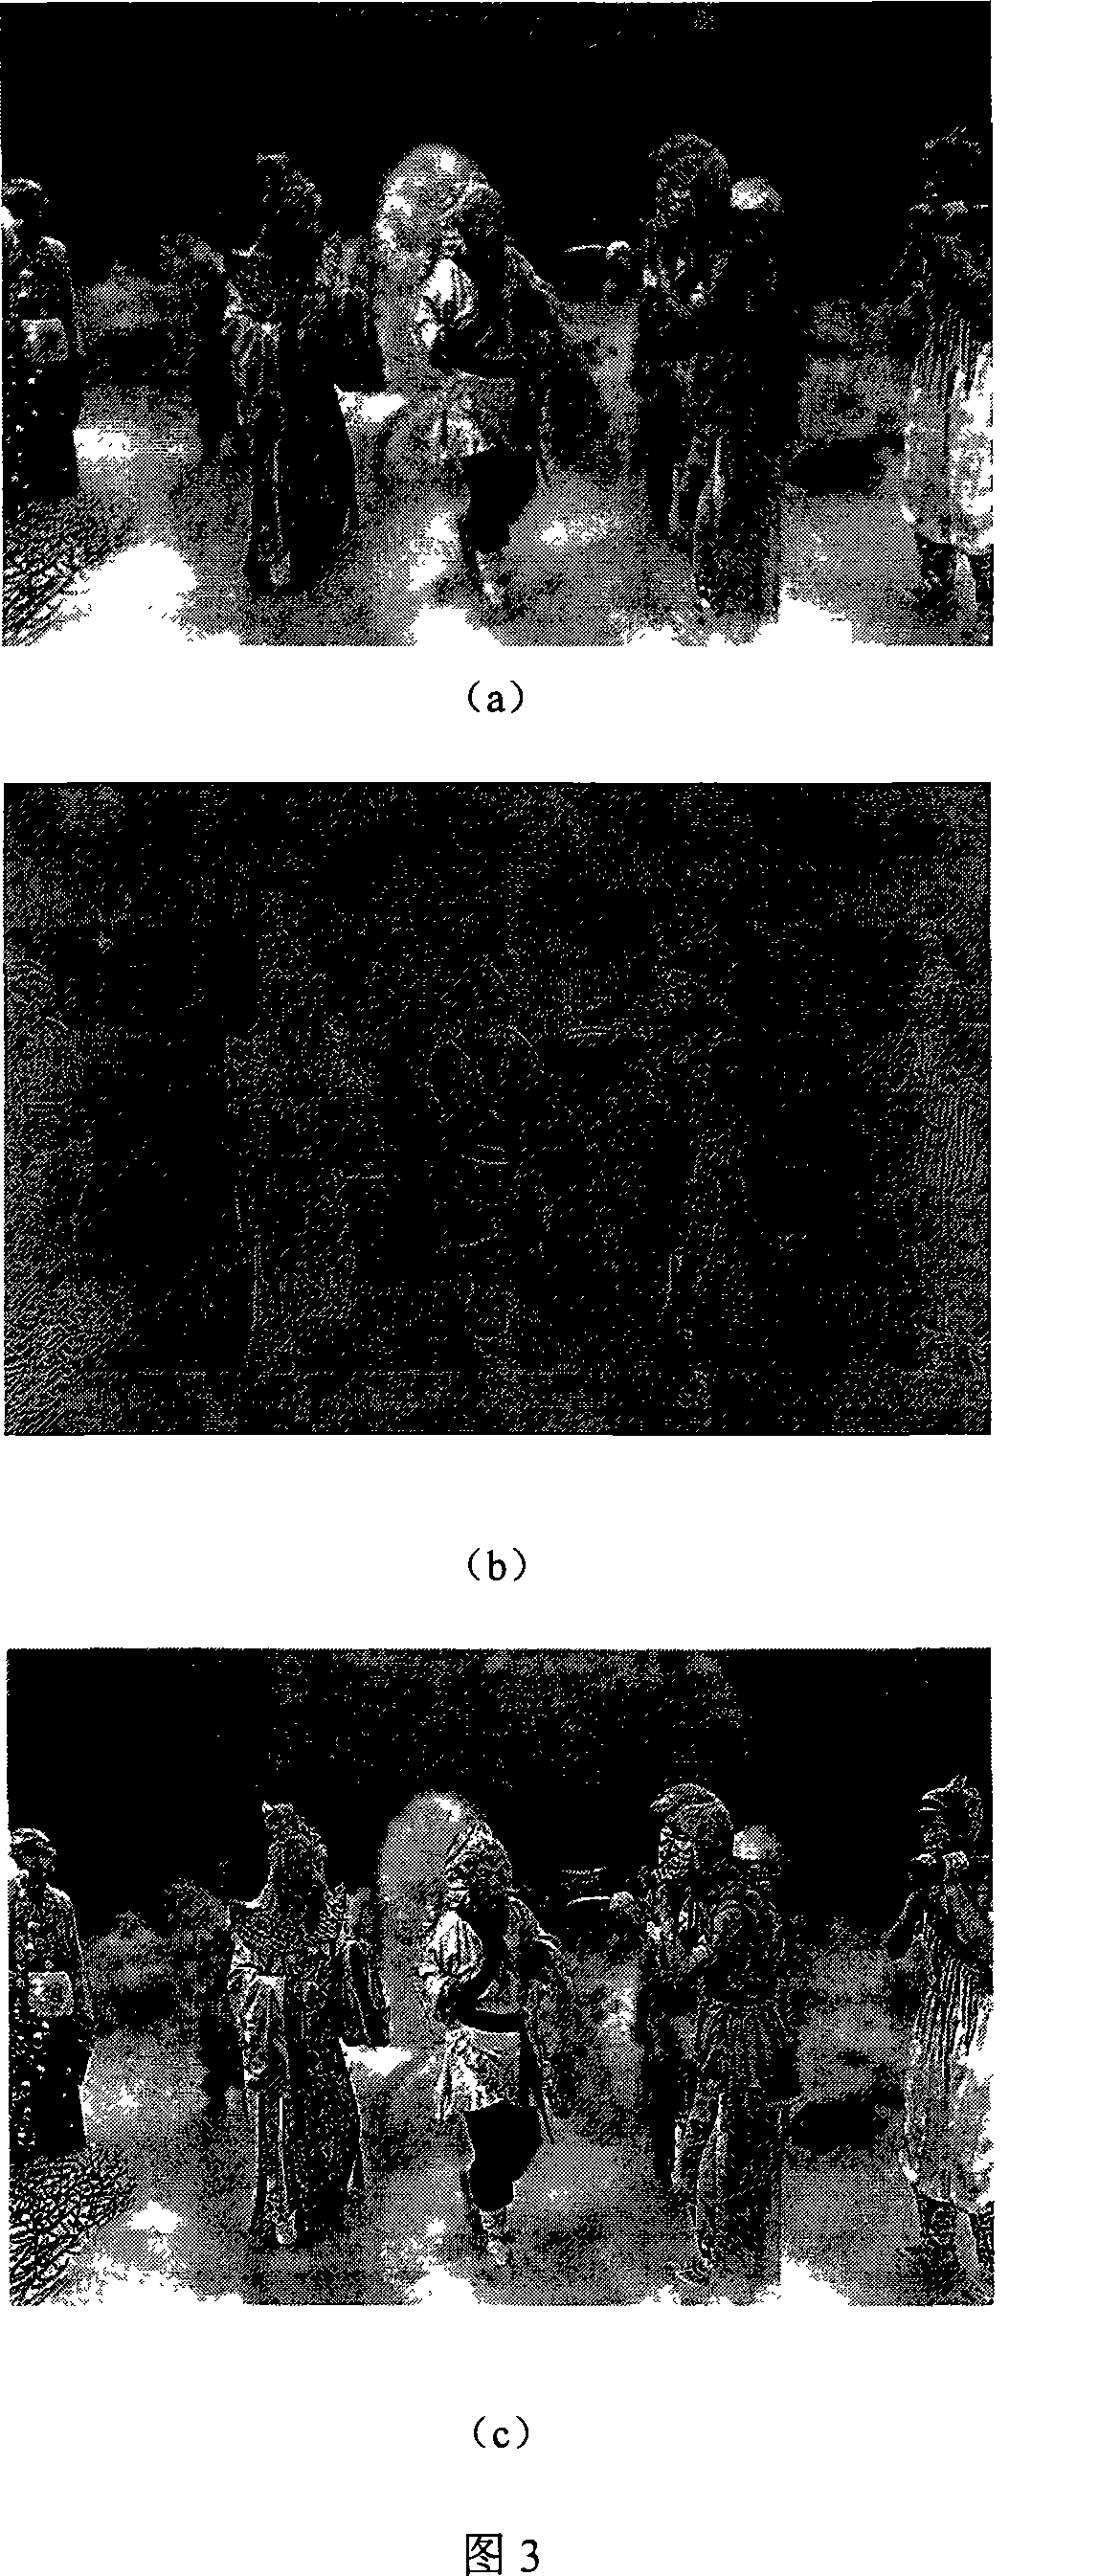 Method for converting flat video to tridimensional video based on real-time dialog between human and machine